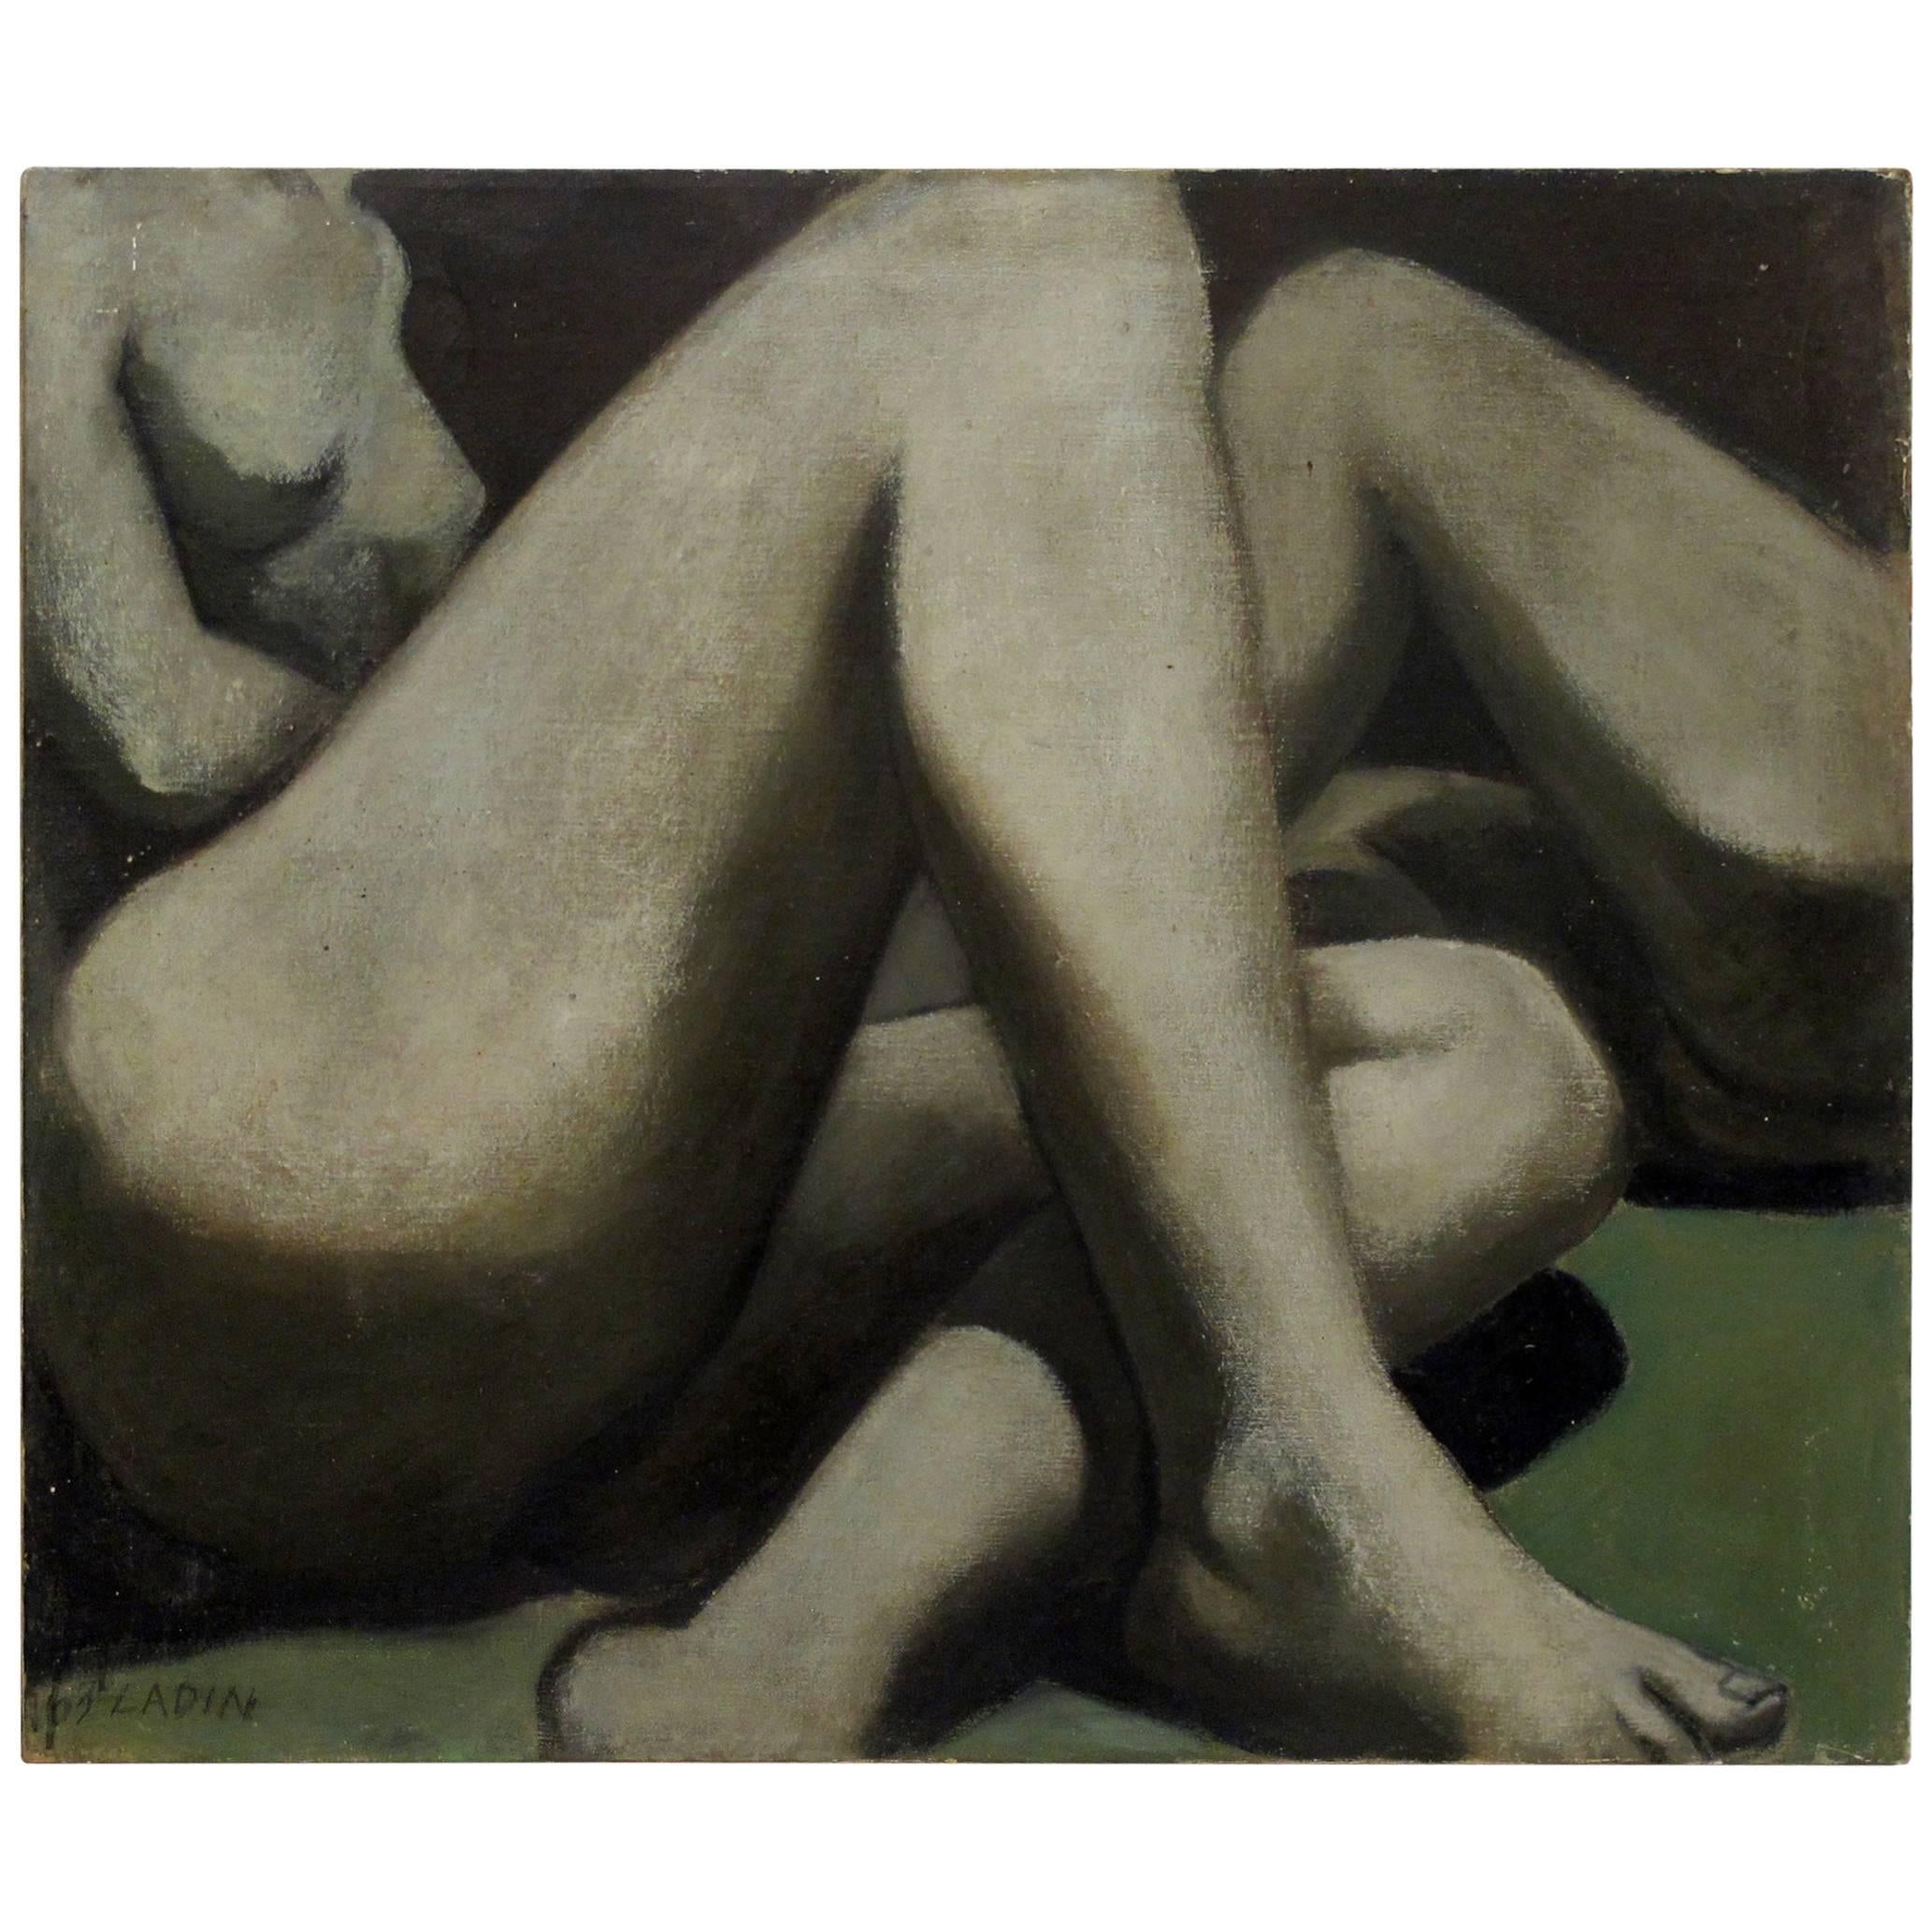 A large and beautifully painted nude figure. Oil on canvas, newly framed, signed Ladin and dated 1963, American, mid-20th century. Please see our other listings for companion paintings by this artist. 